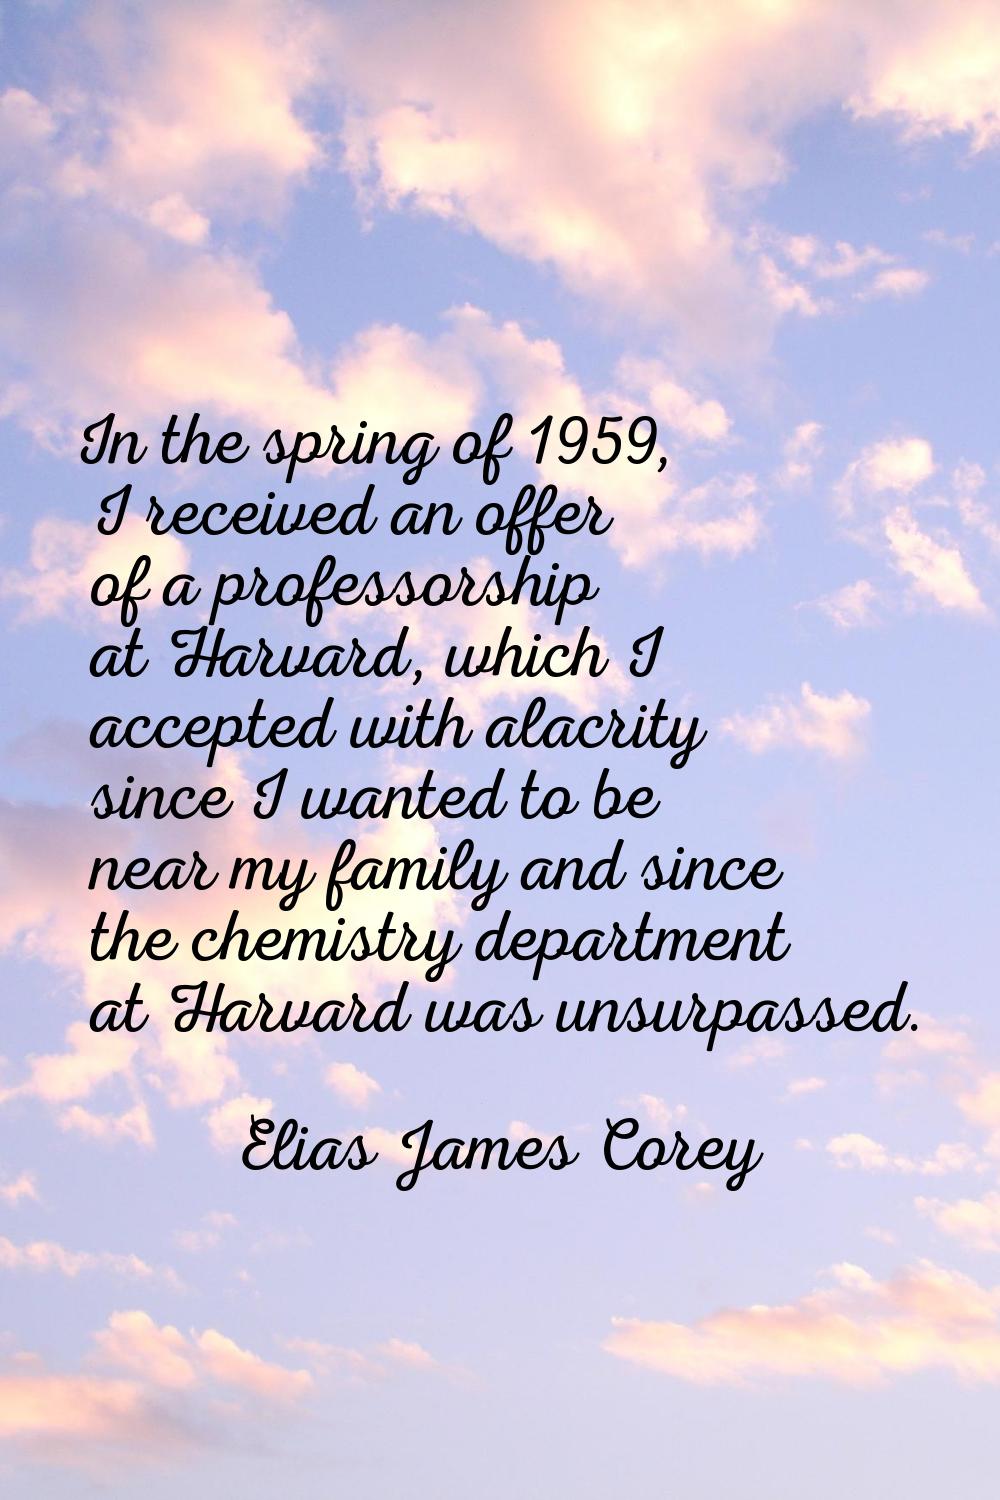 In the spring of 1959, I received an offer of a professorship at Harvard, which I accepted with ala